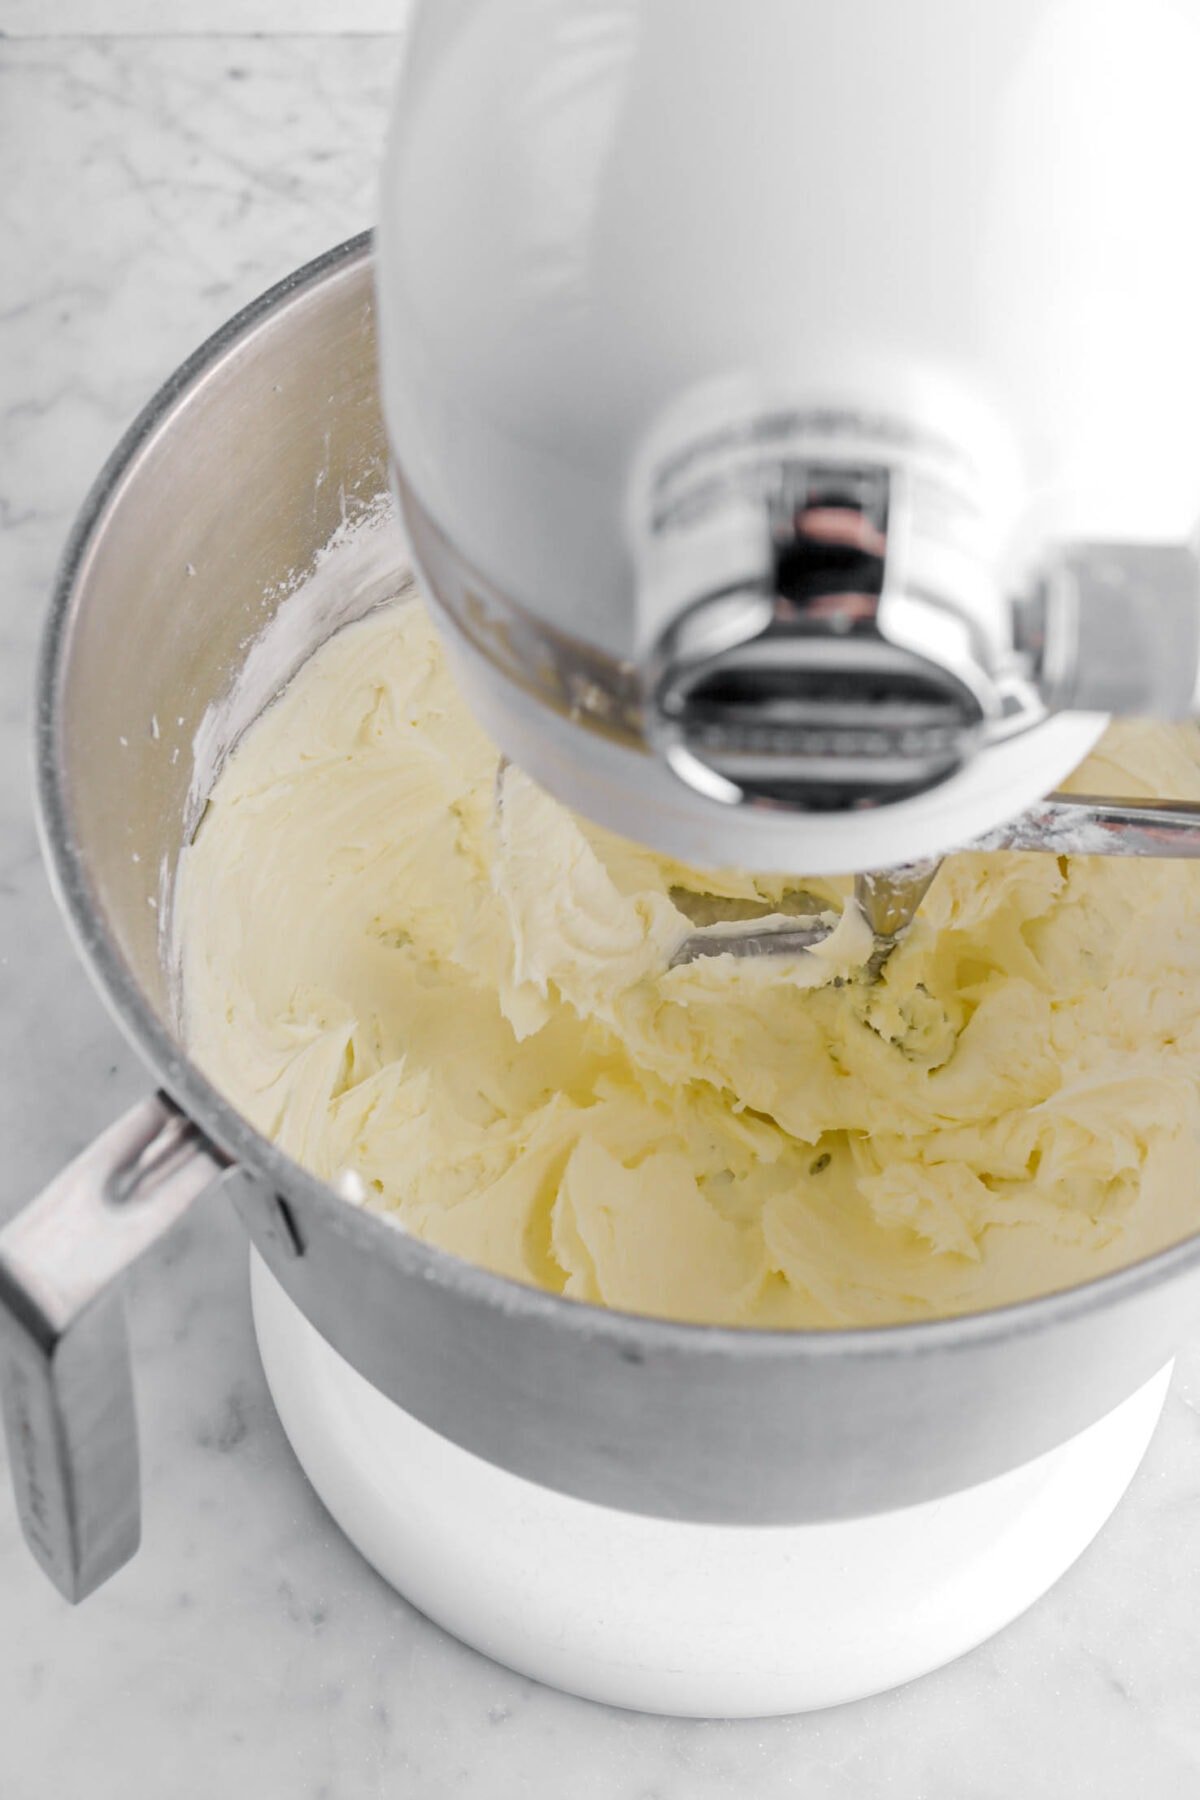 butter and powdered sugar mixture in stand mixer.